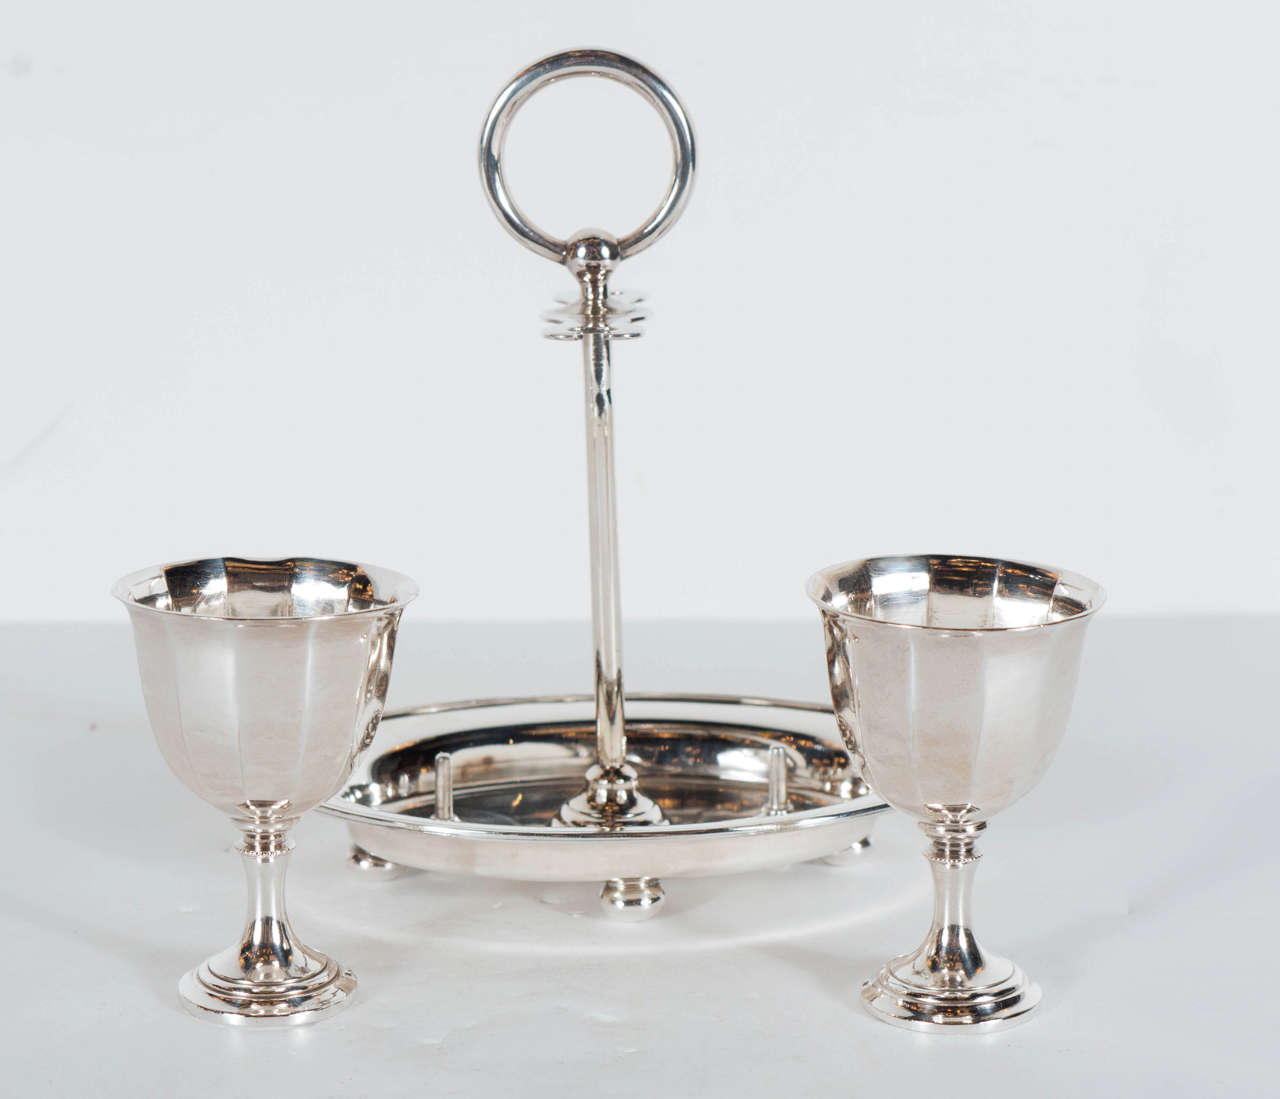 This  Art Deco 2 egg holder features a stylized holder fitted with a handle and tray . It is signed Daniel and Arter on the bottom.This is a very elegant piece from another time.